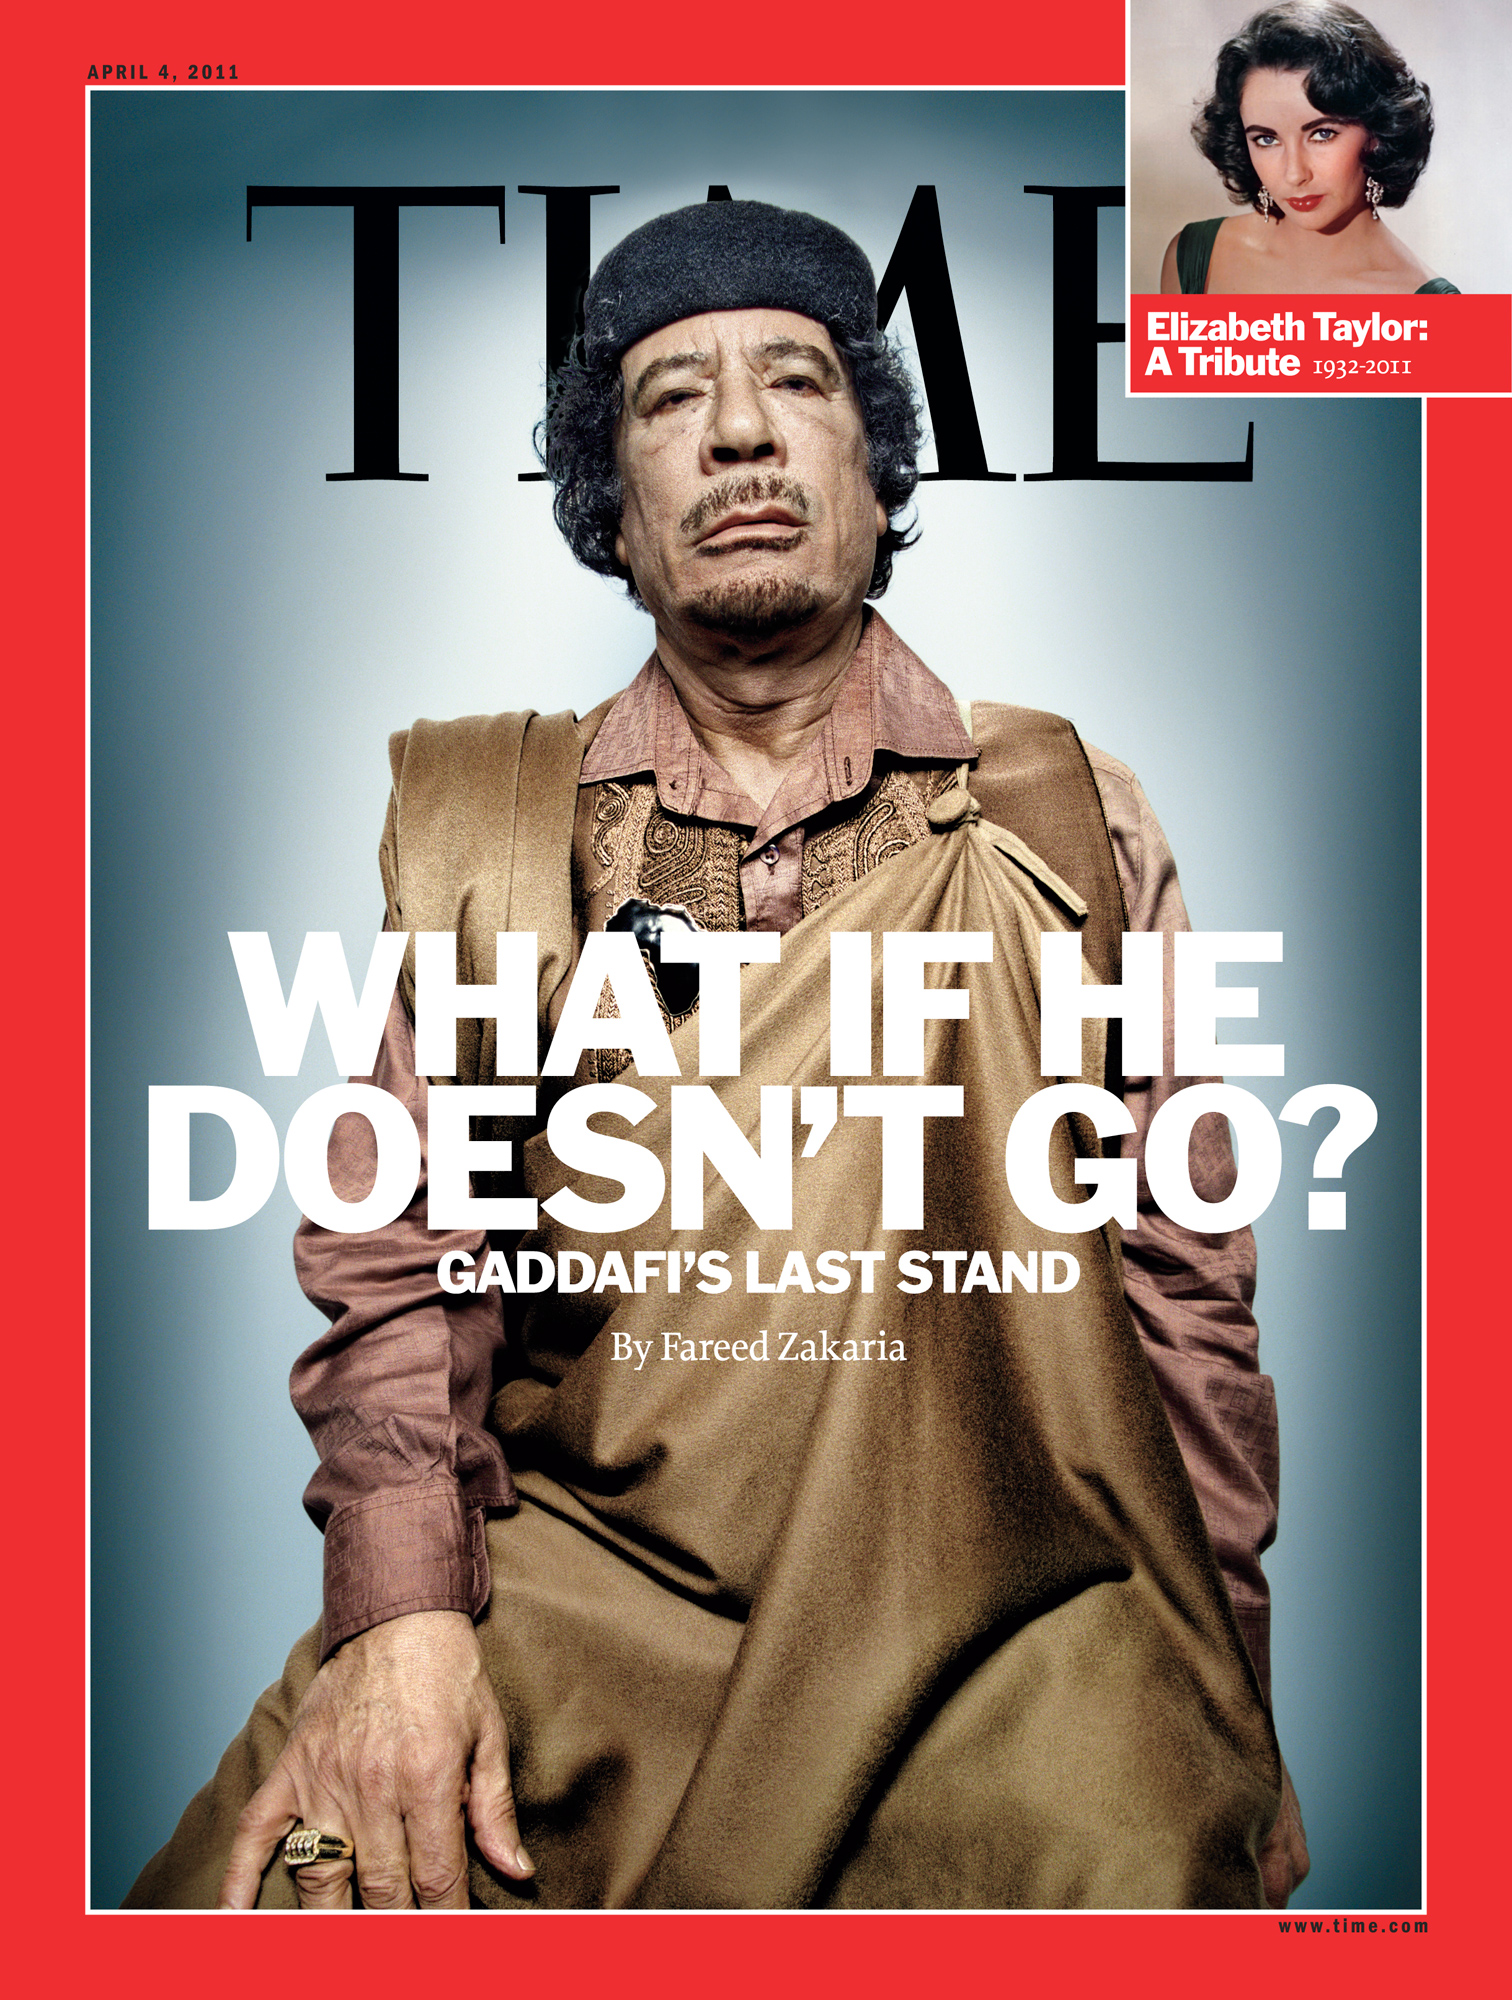 The cover of TIME, April 4, 2011.